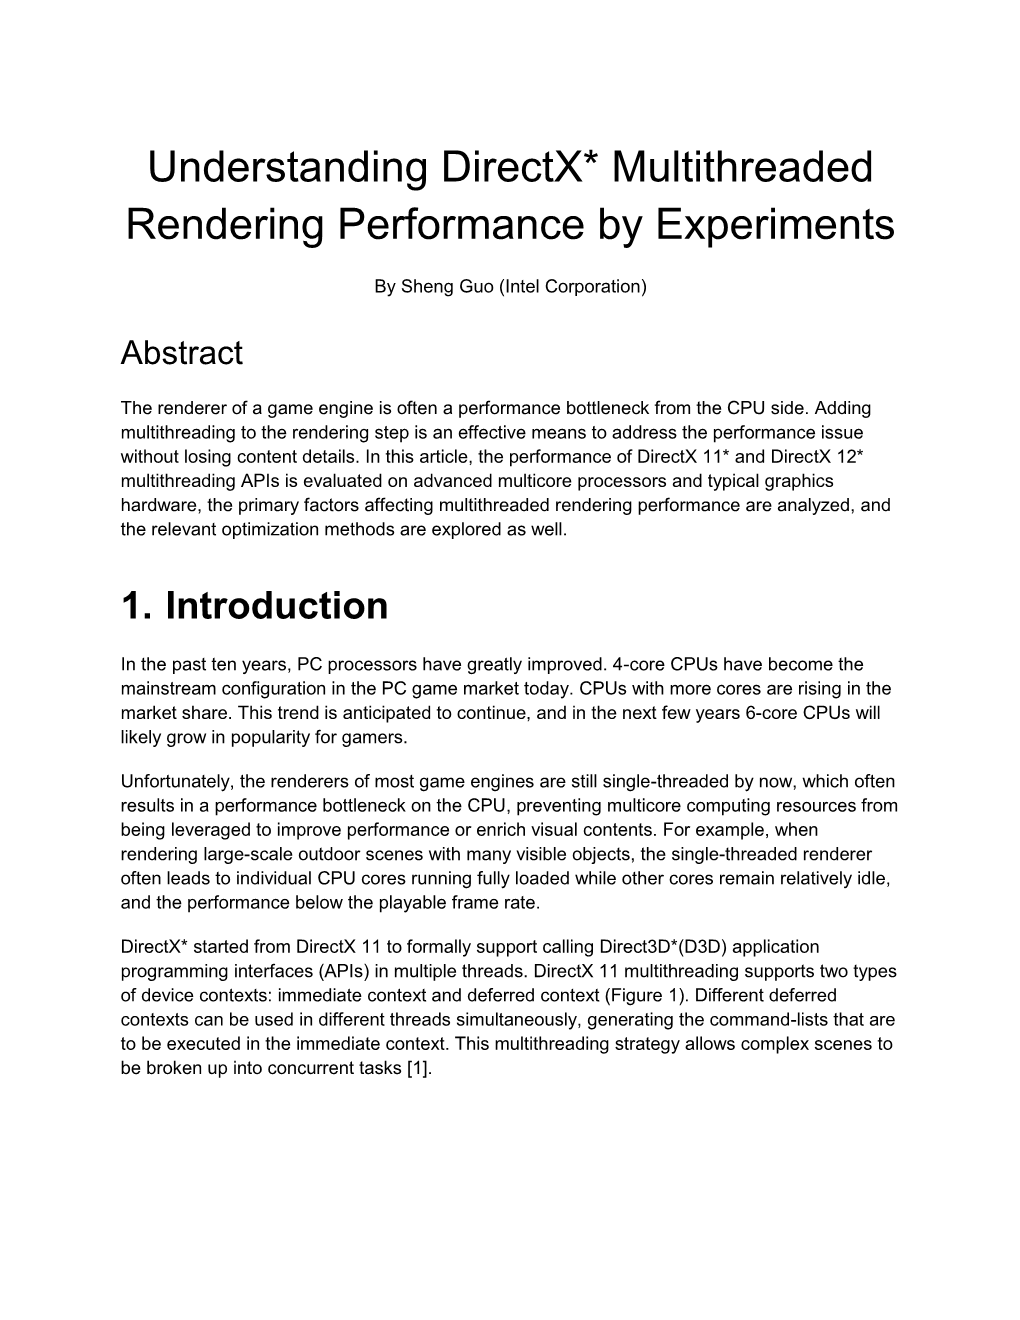 Understanding Directx* Multithreaded Rendering Performance by Experiments